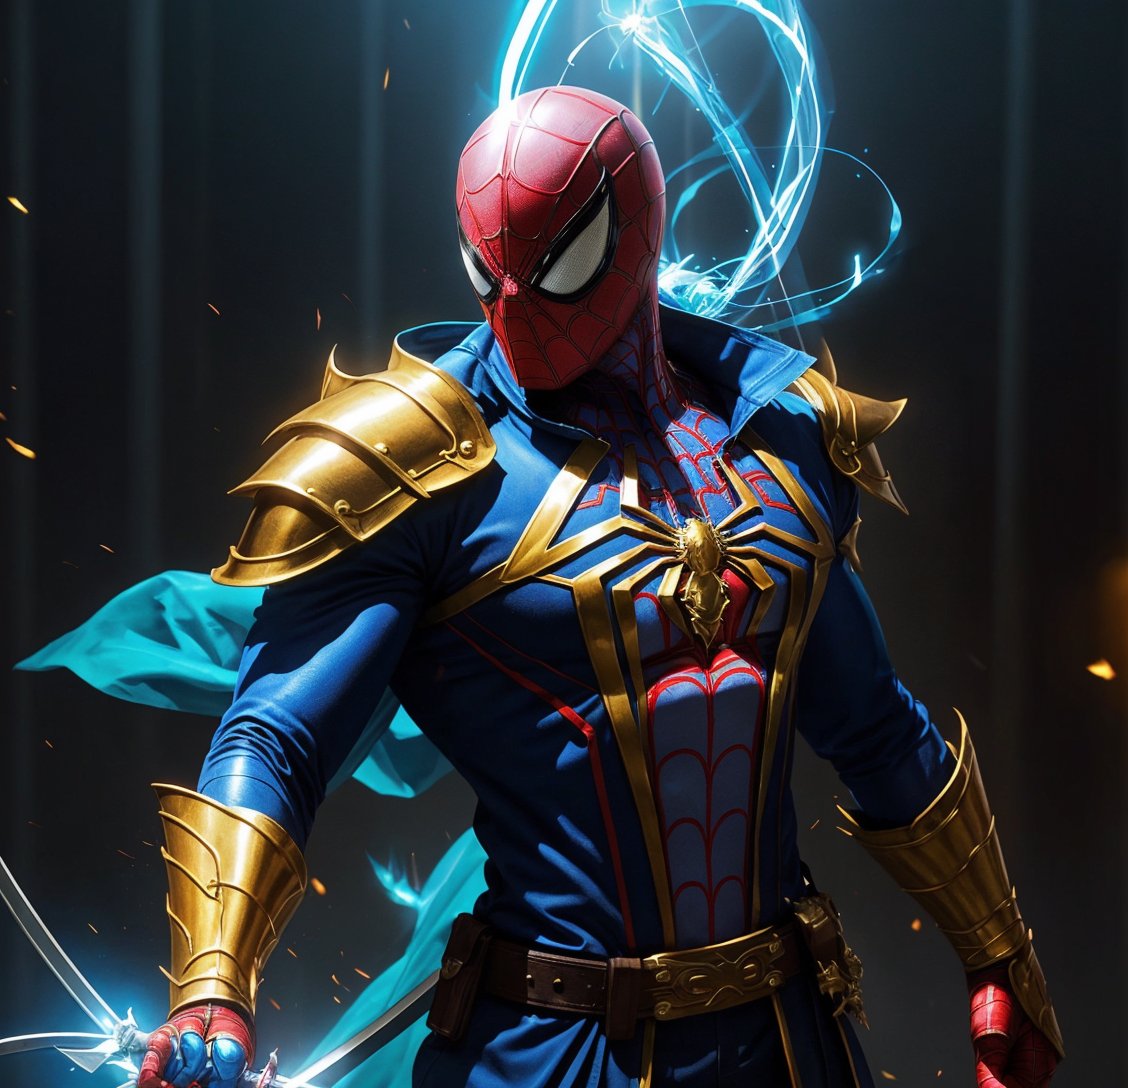 White SPIDERMAN, wears a WHITE suit, uses two blue fire swords, one in each hand, standing on a golden path, holds a blue fire sword in his right hand and a very shiny transparent blue sword in his left hand, muscular , muscular arms, best quality, teacher's workmanship, 8k, uhd, bright light, realistic style, has a letter H on his suit, hyper detailed muscles, DAY lighting, has a belt with letter H buckle,armor,nhdsrmr, rmspdvrs